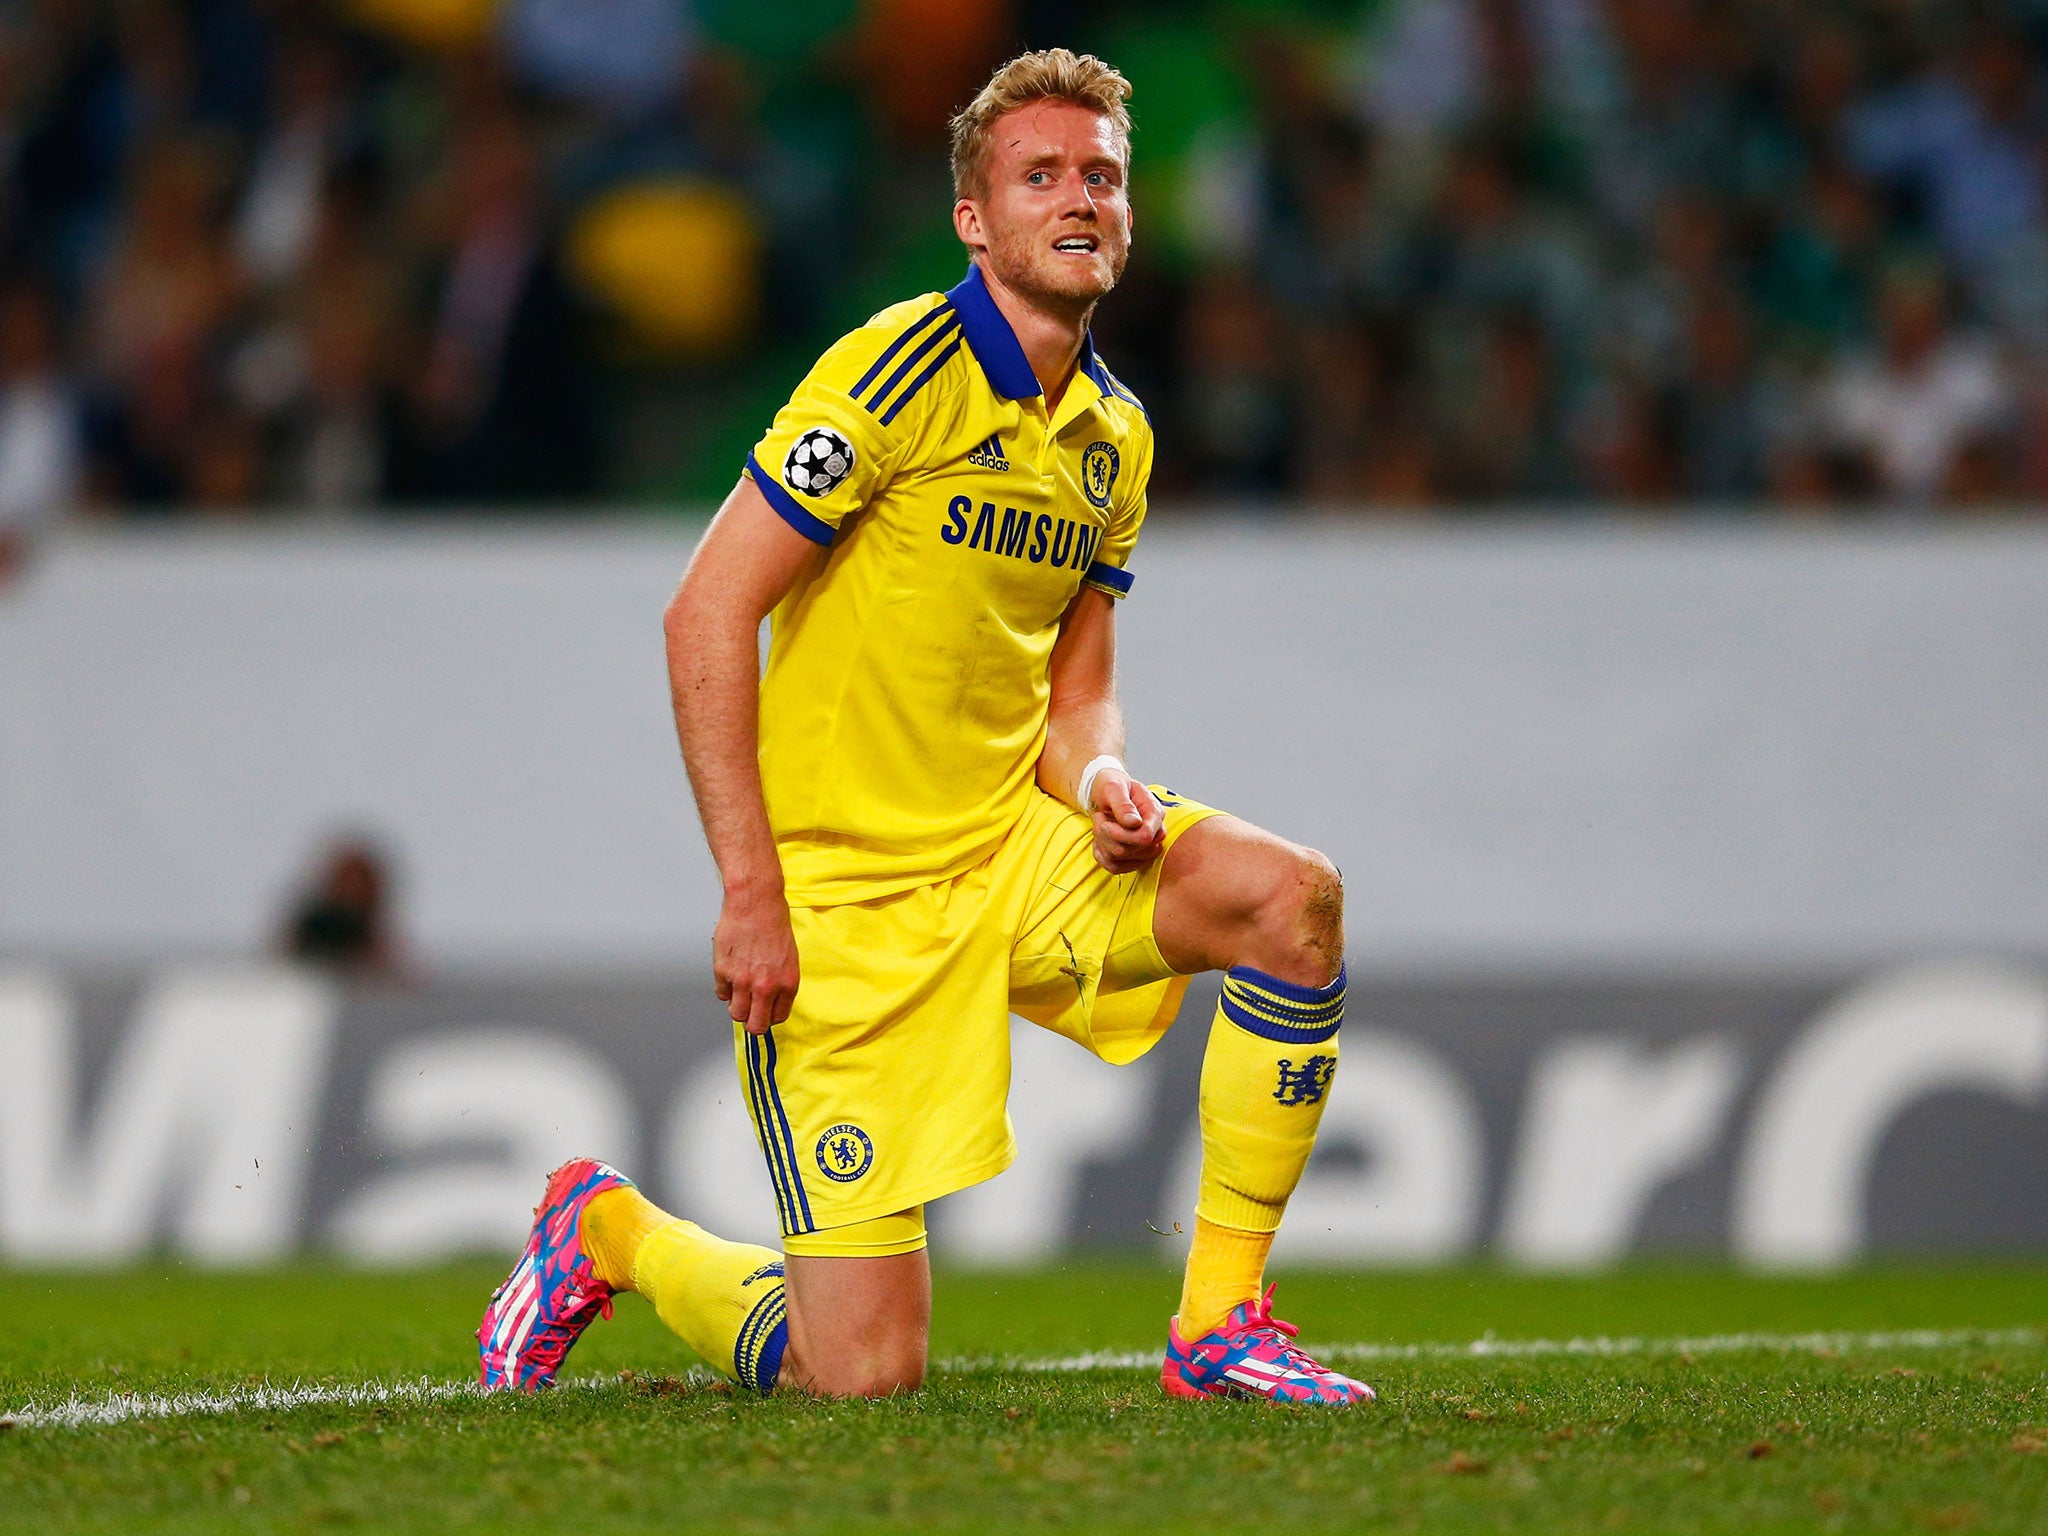 Andre Schurrle looks likely to move to Wolfsburg for £27m